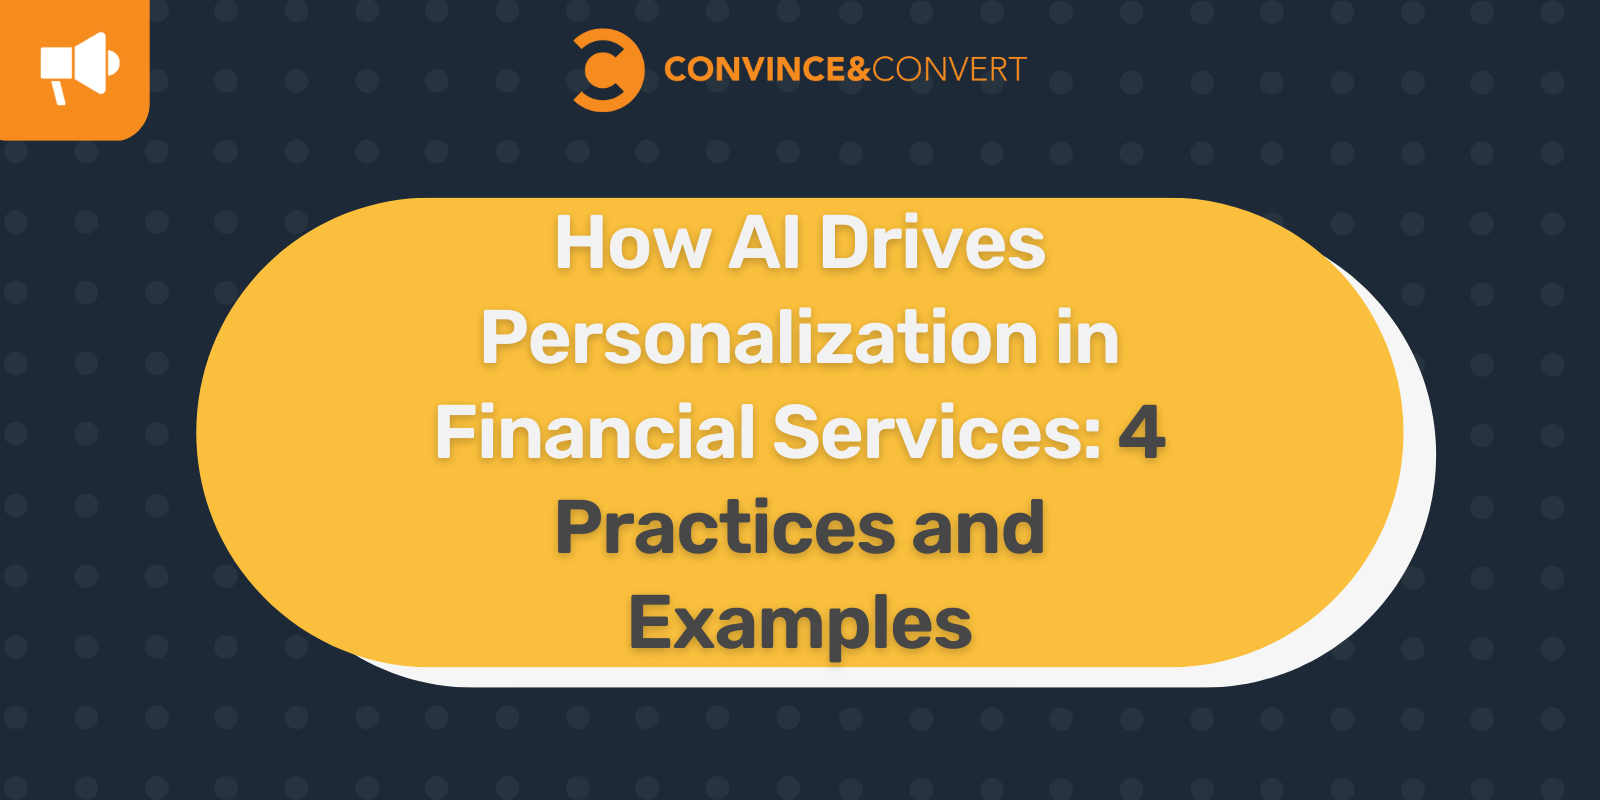 How AI Drives Personalization in Financial Services 4 Practices and Examples